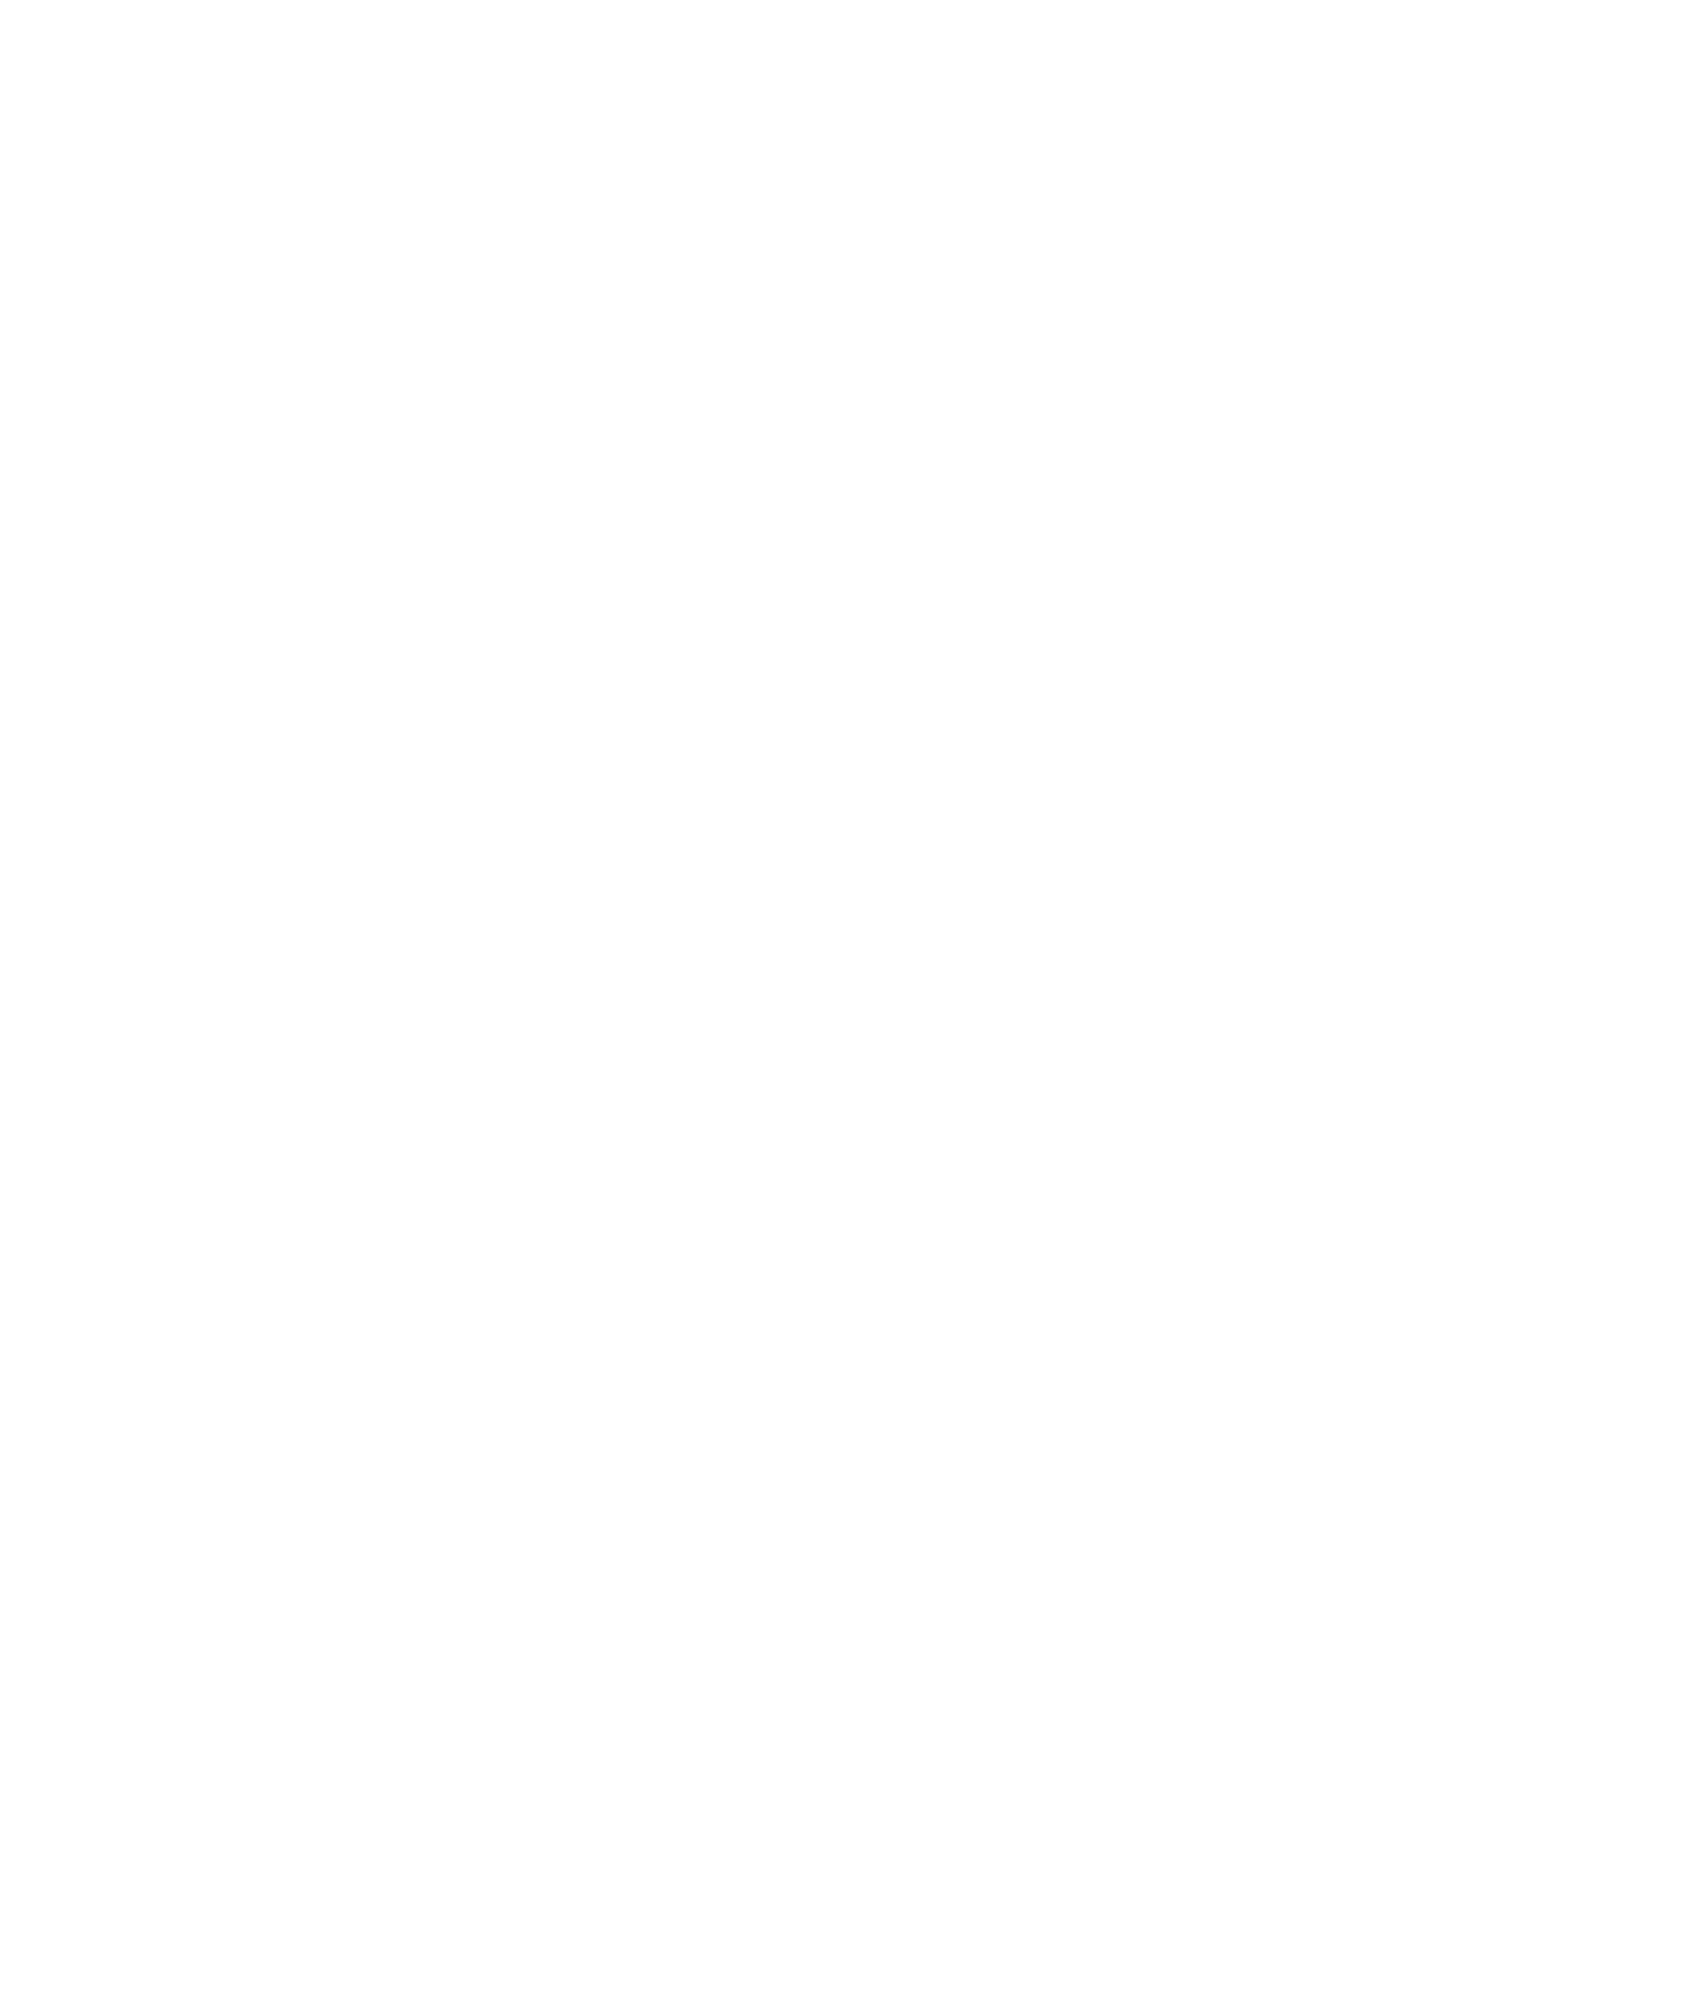 A I SYSTEM